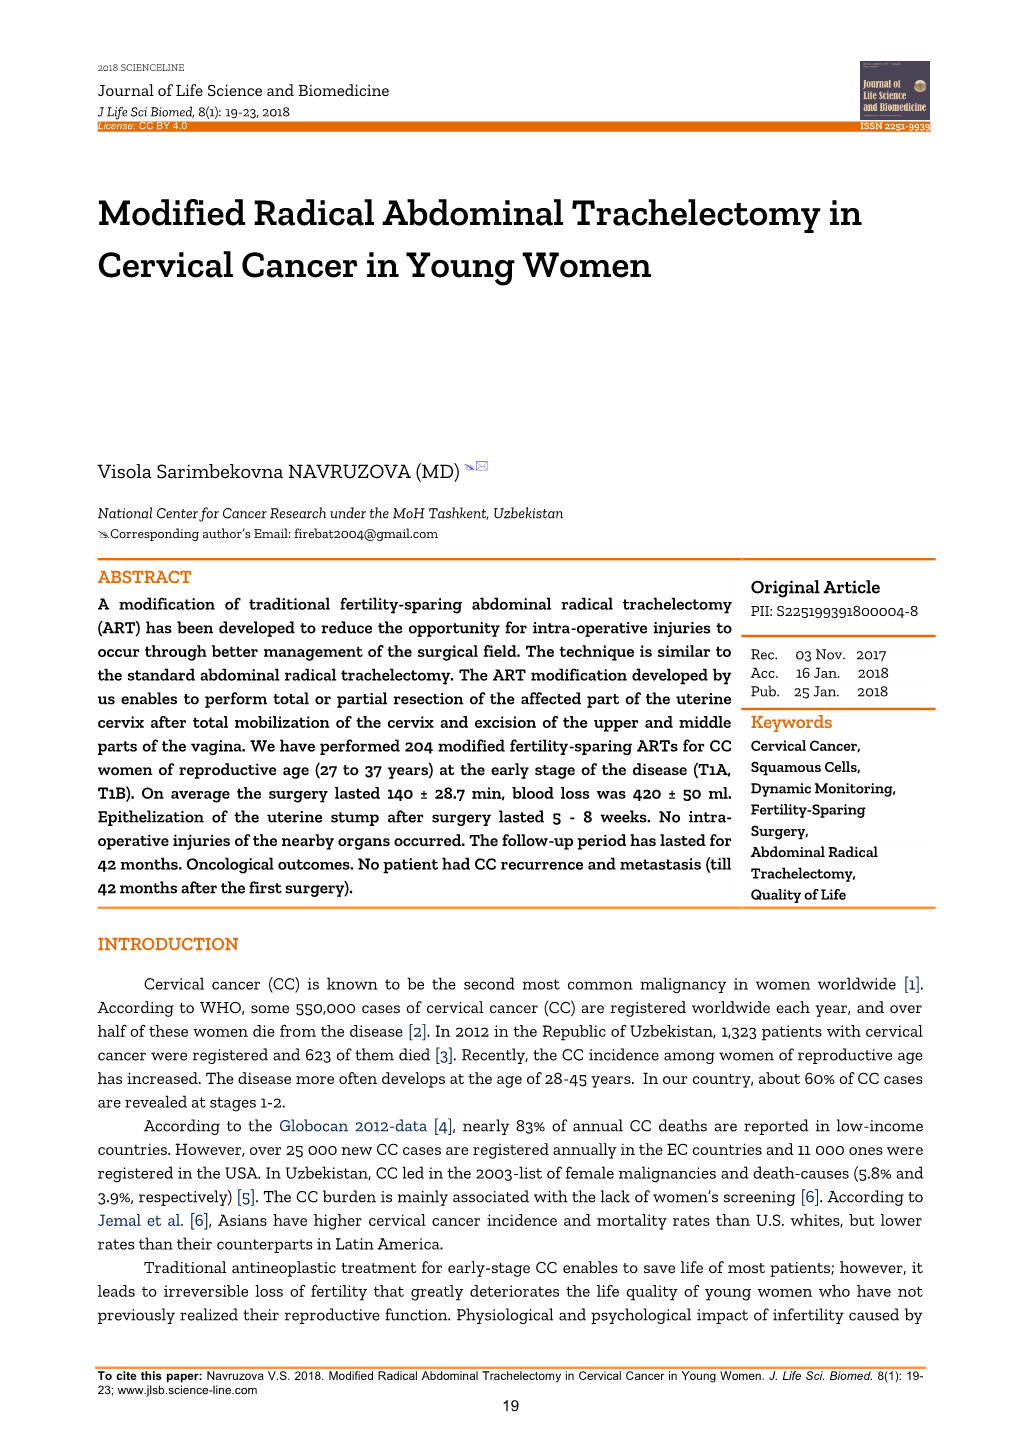 Modified Radical Abdominal Trachelectomy in Cervical Cancer in Young Women. J. Life Sci. Biomed. 8(1): 19-23;